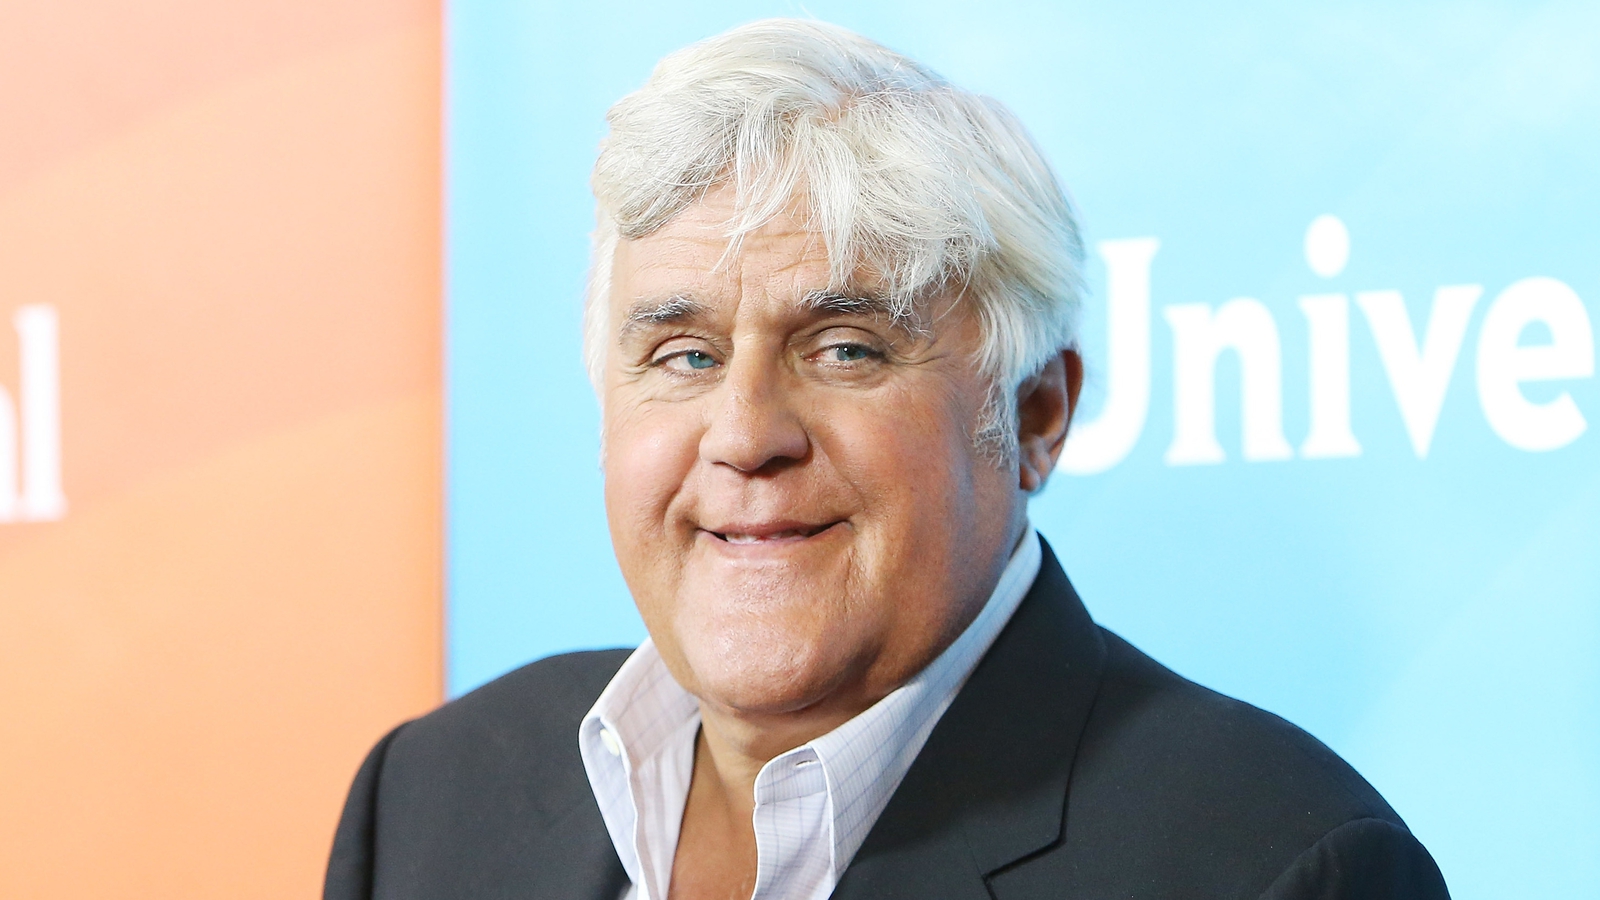 Jay Leno Discharged From Burns Hospital After Accident